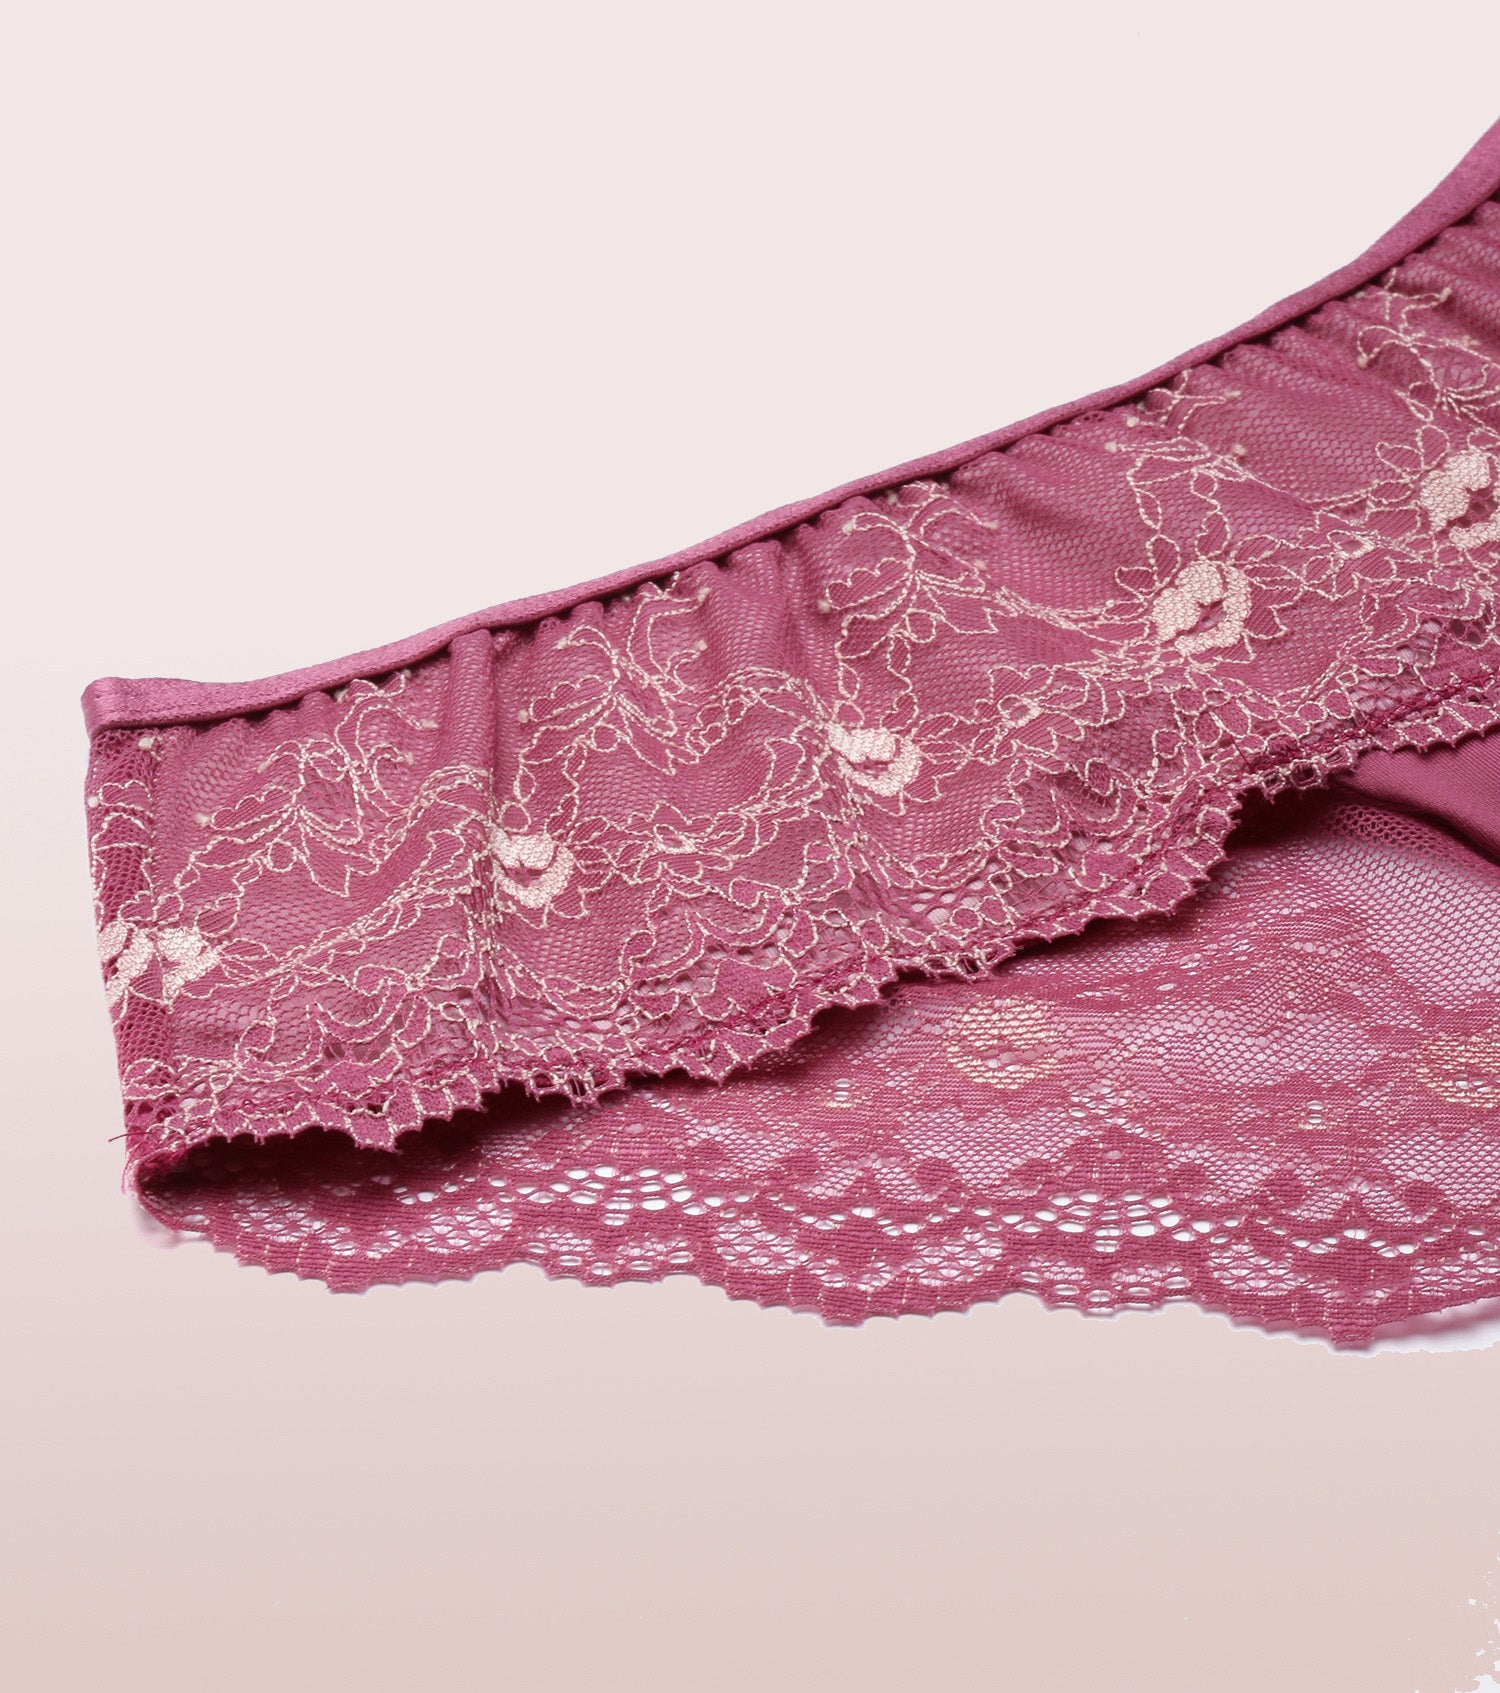 Buy Enamor P116 Lace Women Hipster Pink Panty Online at Best